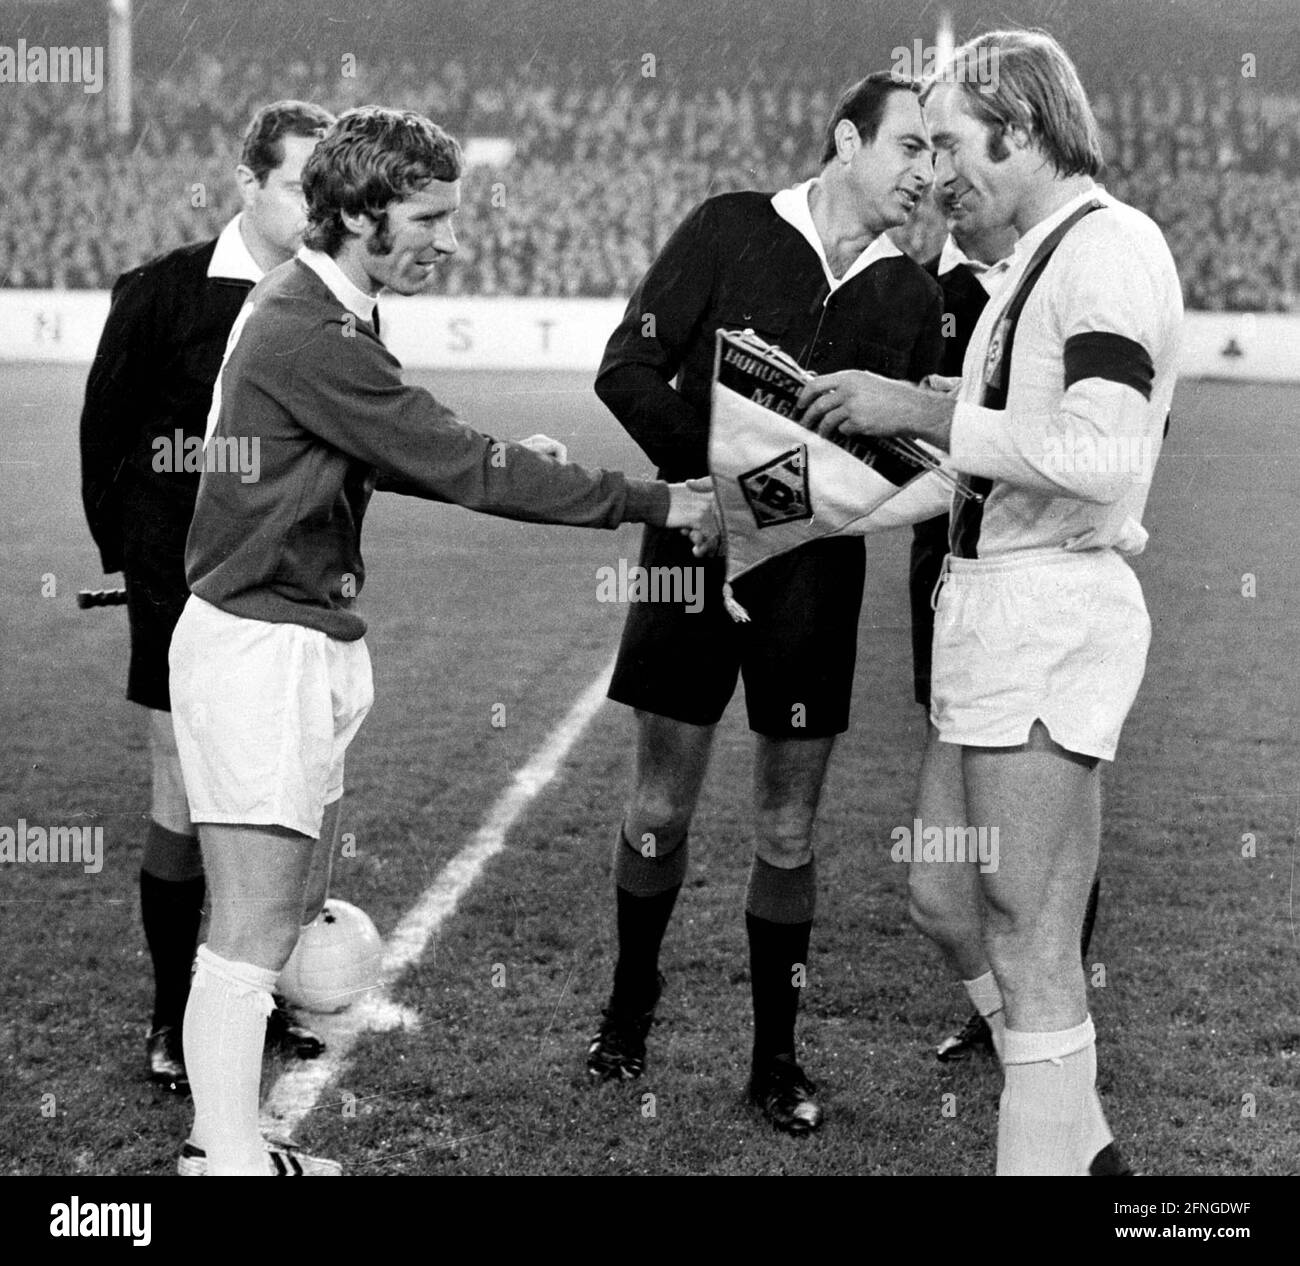 European Cup of the national champions 1970/71. FC Everton - Borussia Mönchengladbach 04.11.1970 5:4 n.E. Greeting between Alan Ball (l.) and Günter Netzer. For journalistic use only! Only for editorial use! [automated translation] Stock Photo